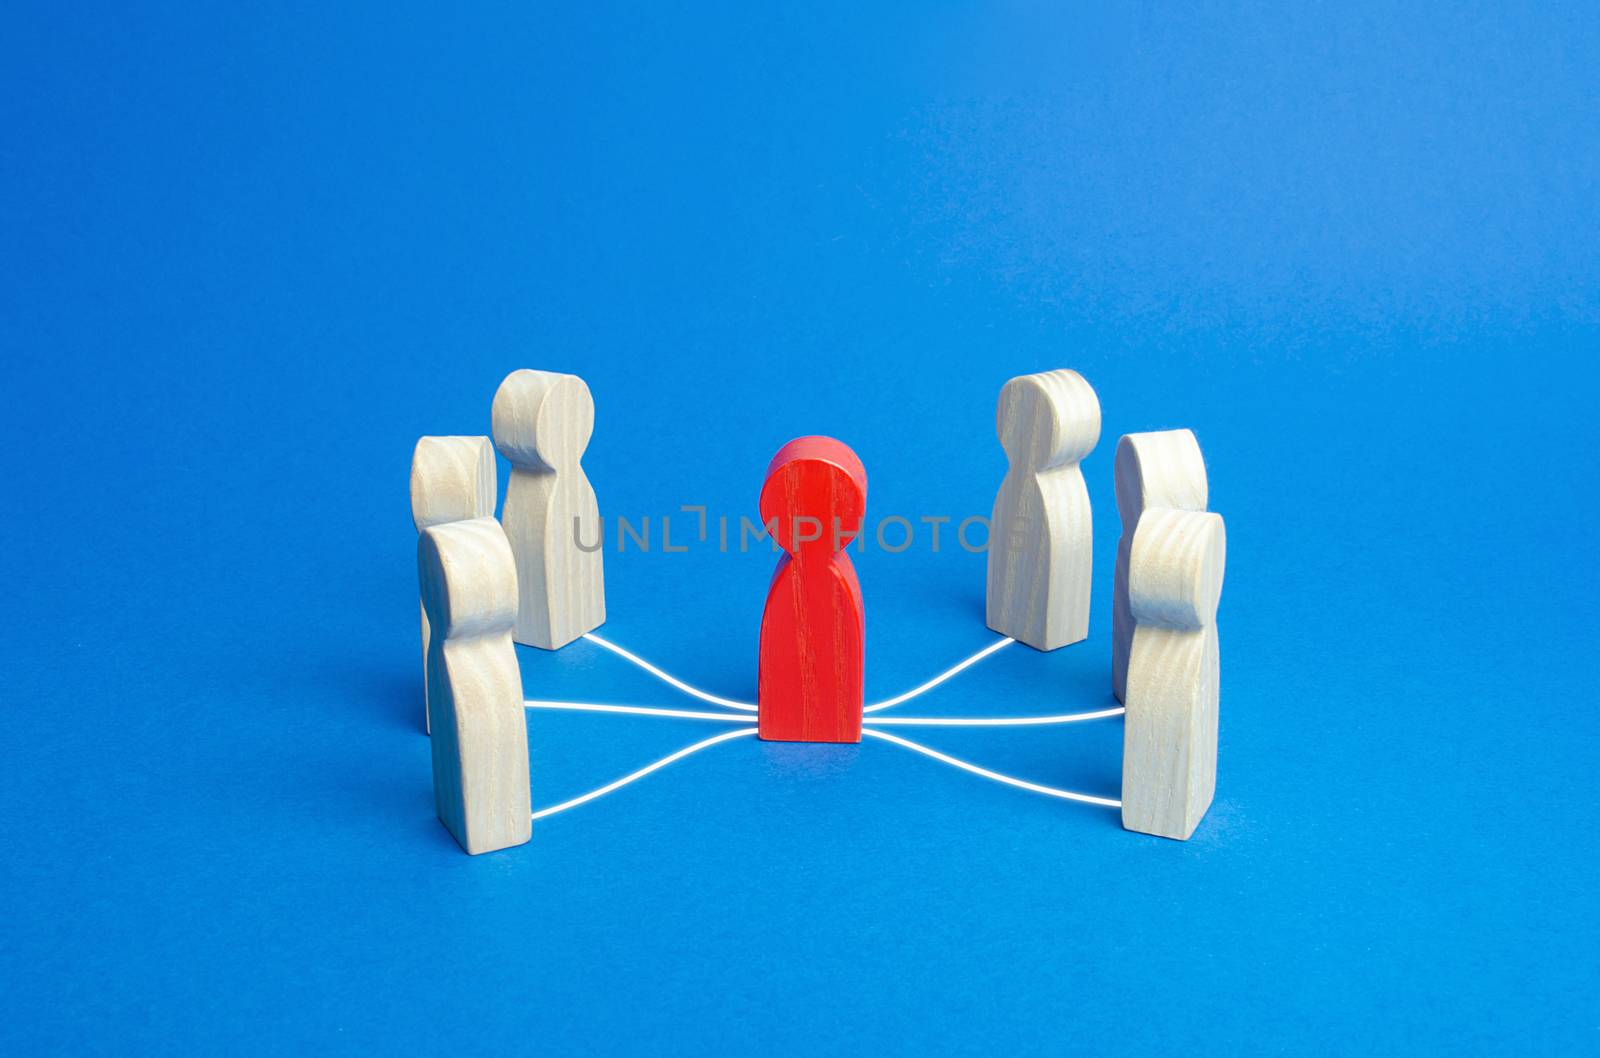 Mediation intermediary between people. Business deal. Political diplomatic negotiations. Conflict resolution and consensus building. Influential person with connections. The leader controls the team.